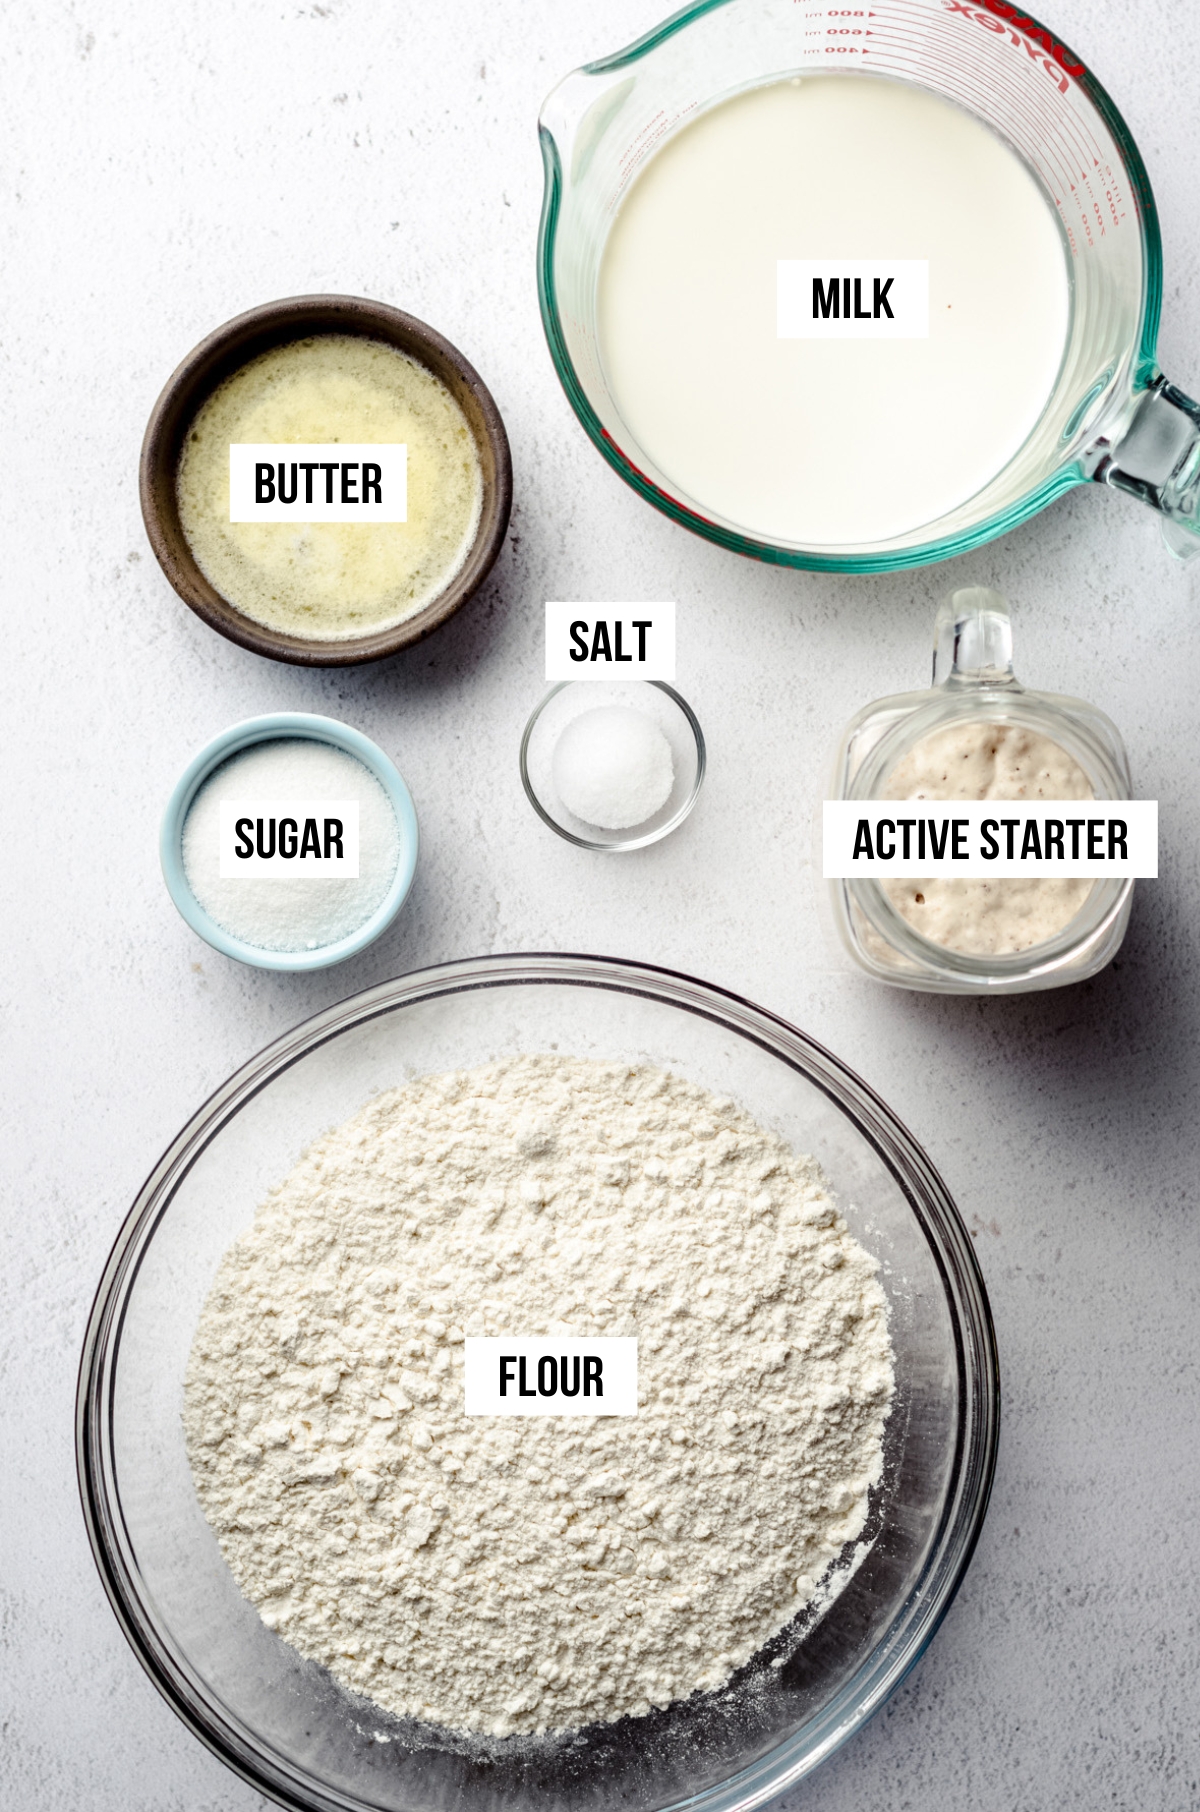 Ingredients for sourdough rolls labeled with text overlay.